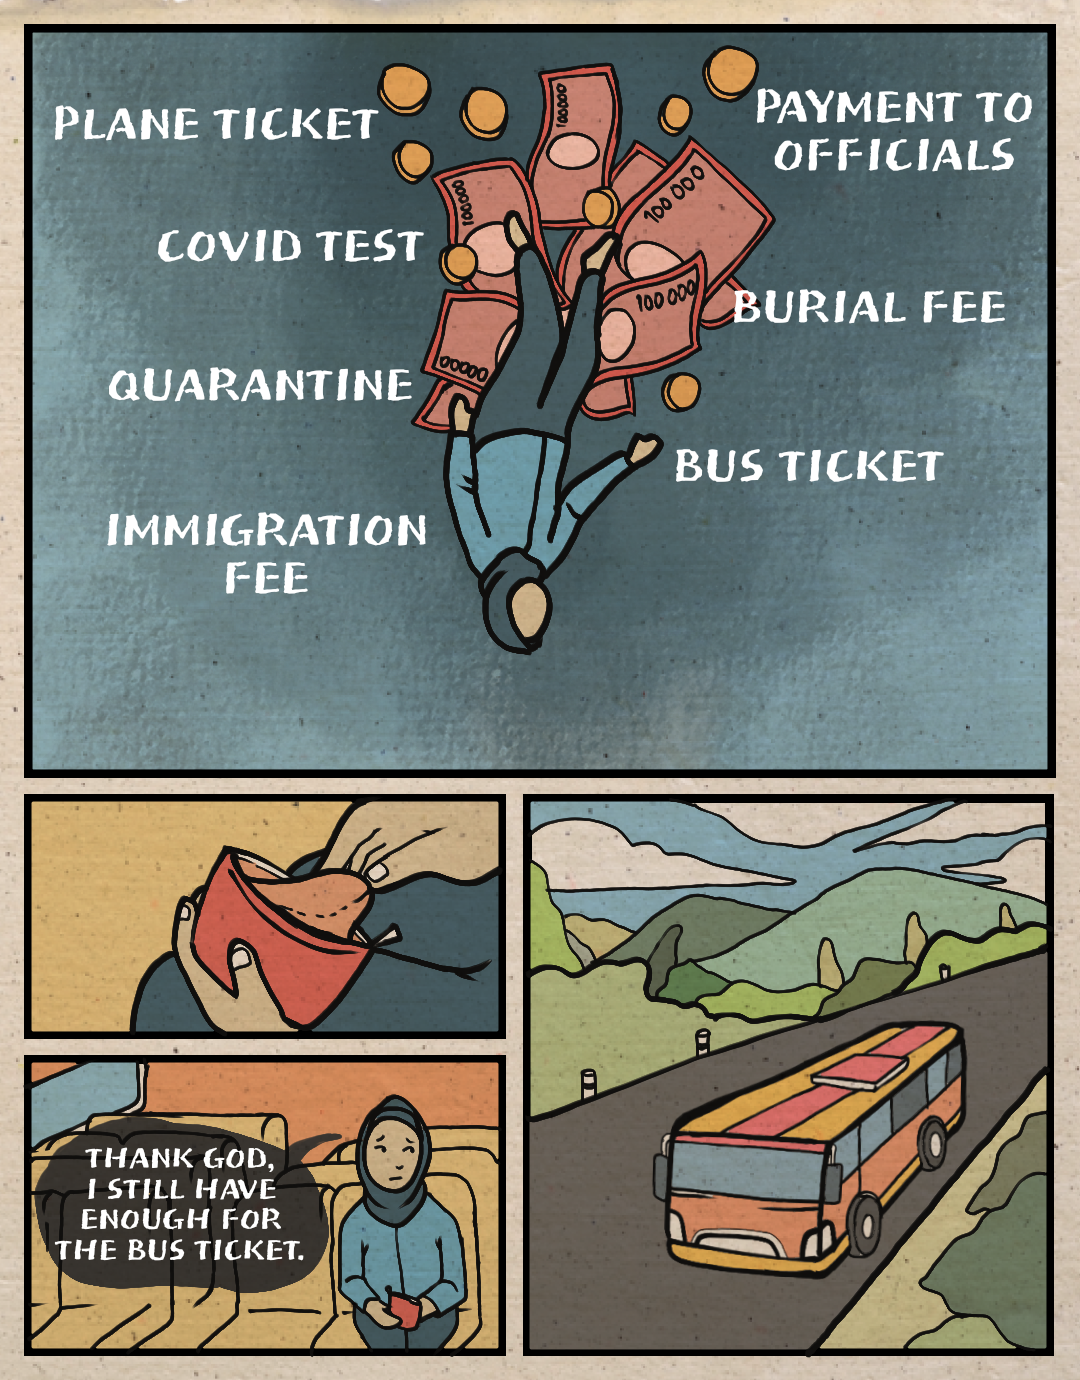 Page 6. A comic page of four panels in full colour, with black lines.
Panel 1. Siti floats alone in her thoughts, thinking about all the costs she’s had to bear thus far. She is surrounded visually by these labels: Plane ticket; COVID test; Quarantine; 
Immigration fee; Payment to officials; Burial fee; Bus ticket.

Panel 2. Close-up of her hands opening her wallet, now empty.

Panel 3. Siti leans back in her bus seat. “Thank God, I still have enough for the bus ticket.”

Panel 4. The bus makes its way from Jakarta to Tegal, her hometown, on a road winding through hills. 
